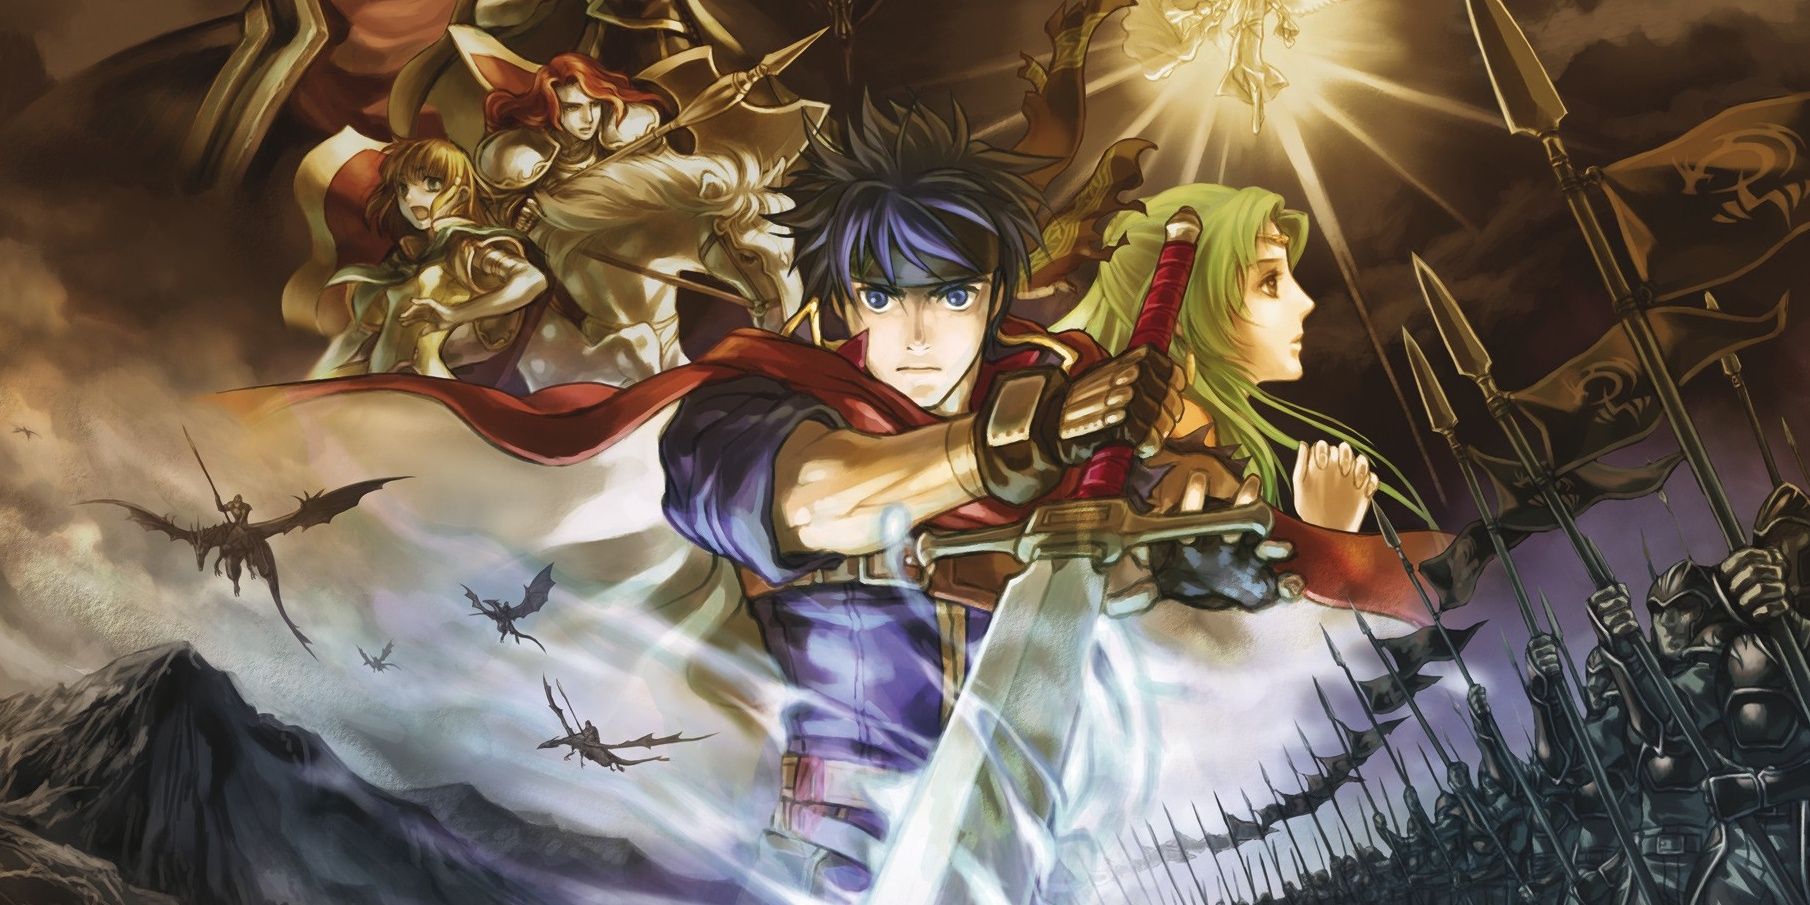 cover art of Fire Emblem: Path of Radiance showing Ike